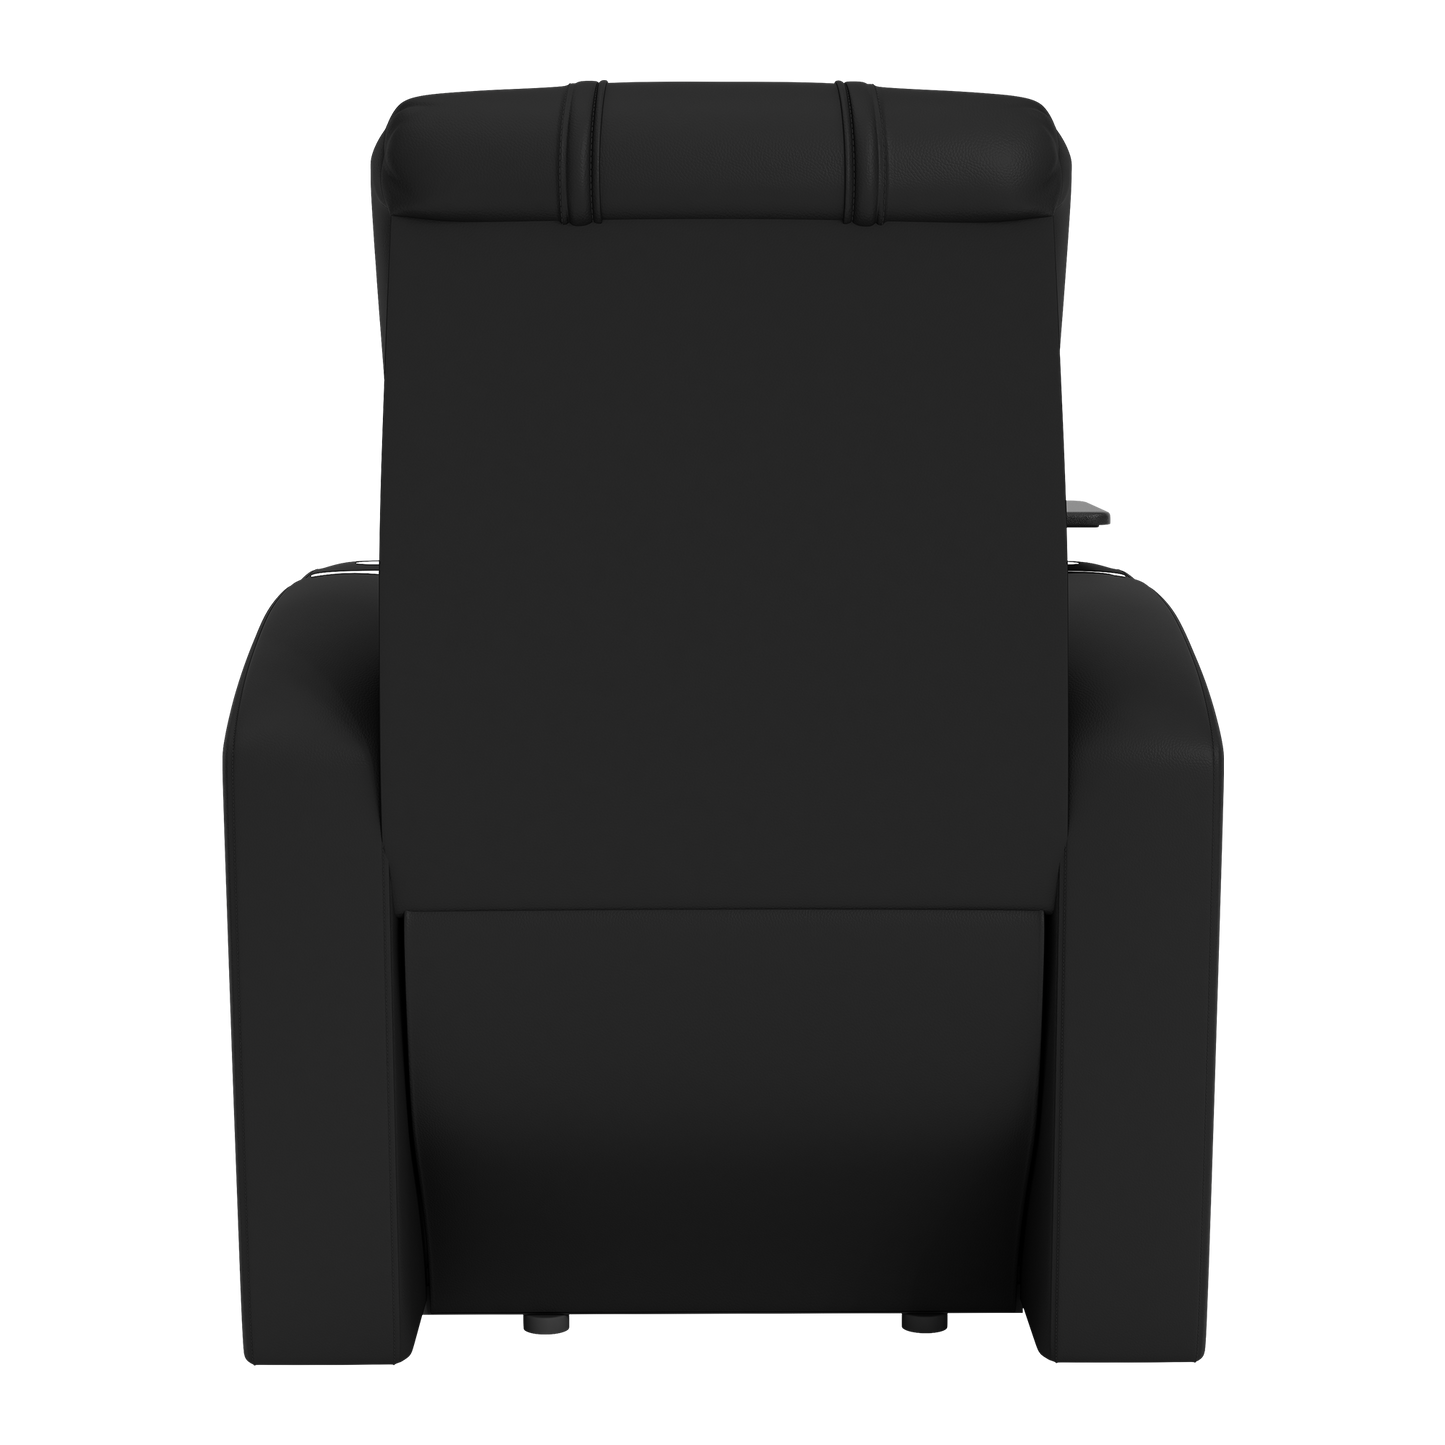 Stealth Power Plus Recliner with South Dakota Coyotes Logo